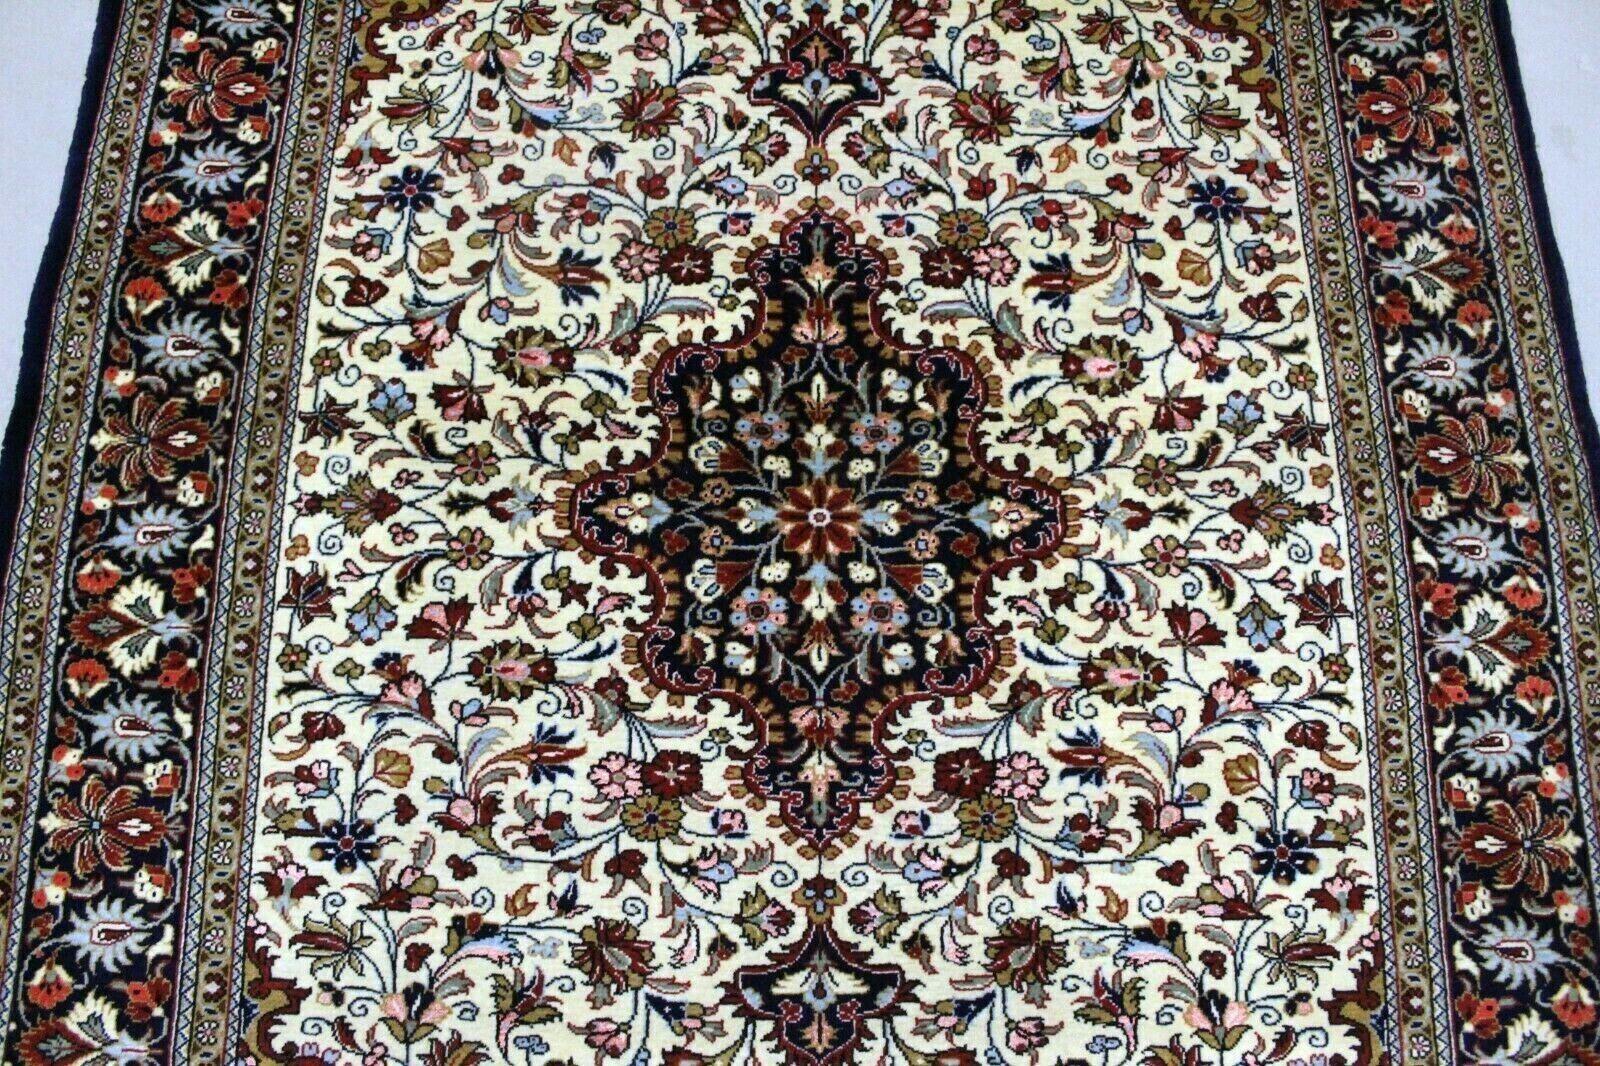 Hand-Knotted Handmade Vintage Persian Style Qum Rug With Silk 3.7' x 5.1', 1970s - 1K44 For Sale